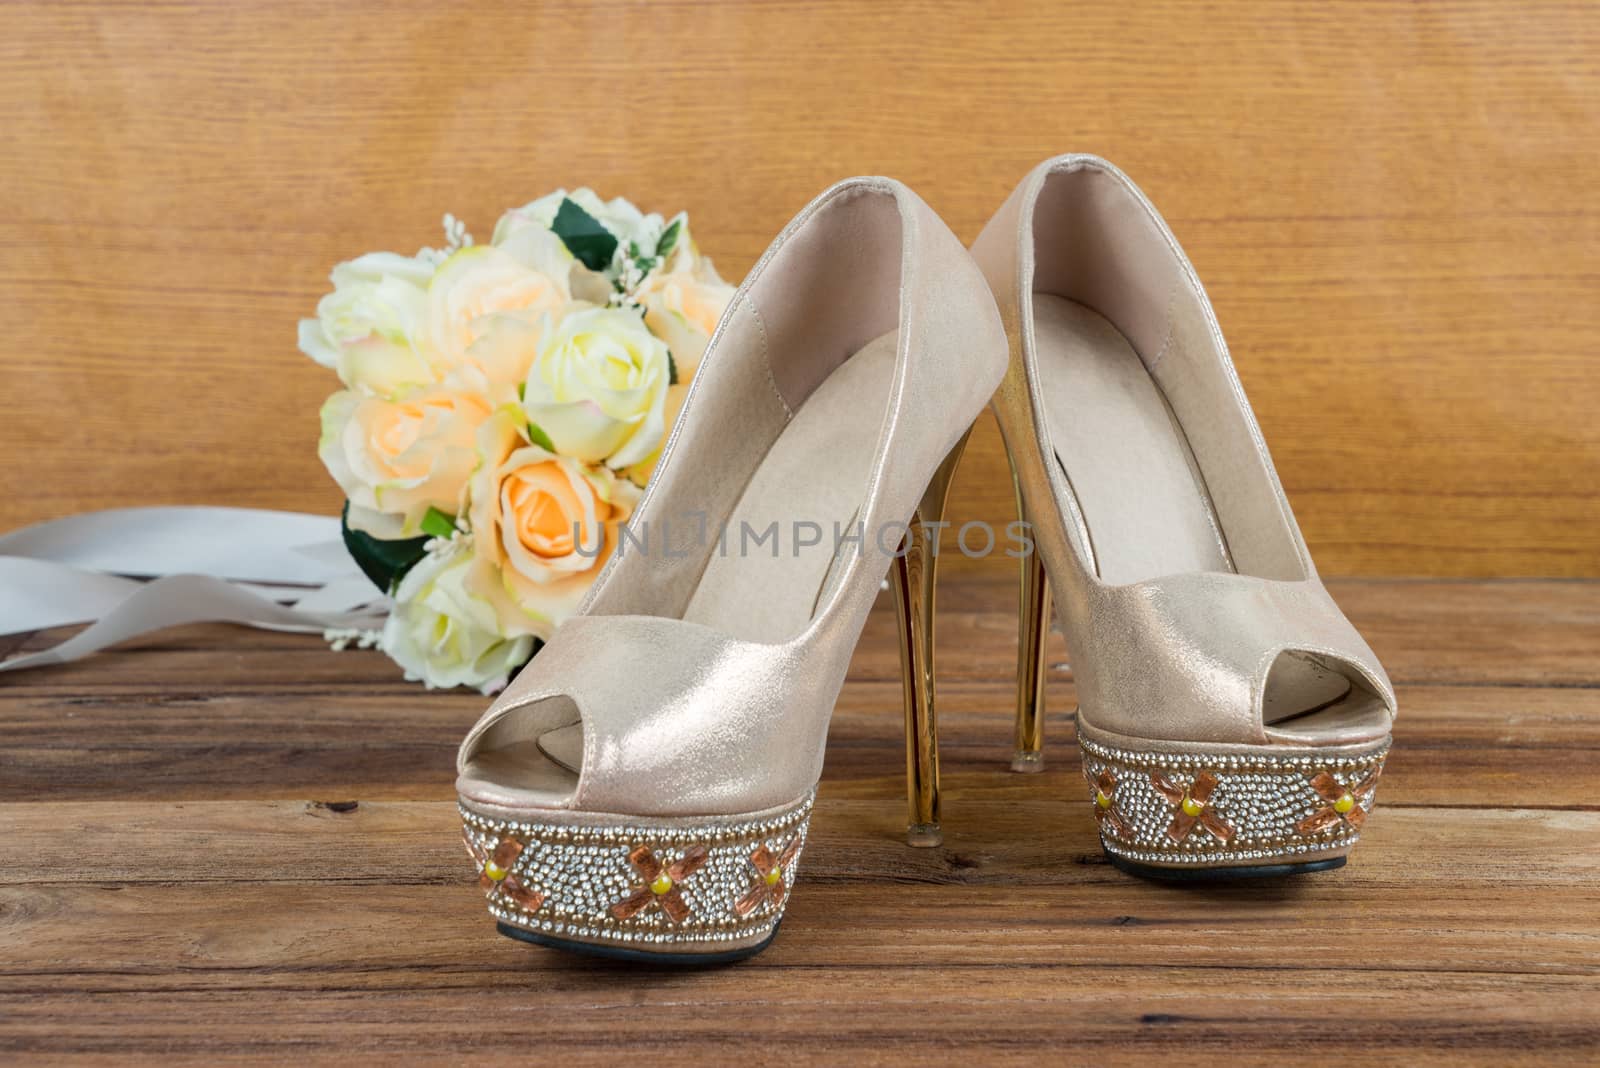 Wedding bouquet with bride's shoes on wood floor background